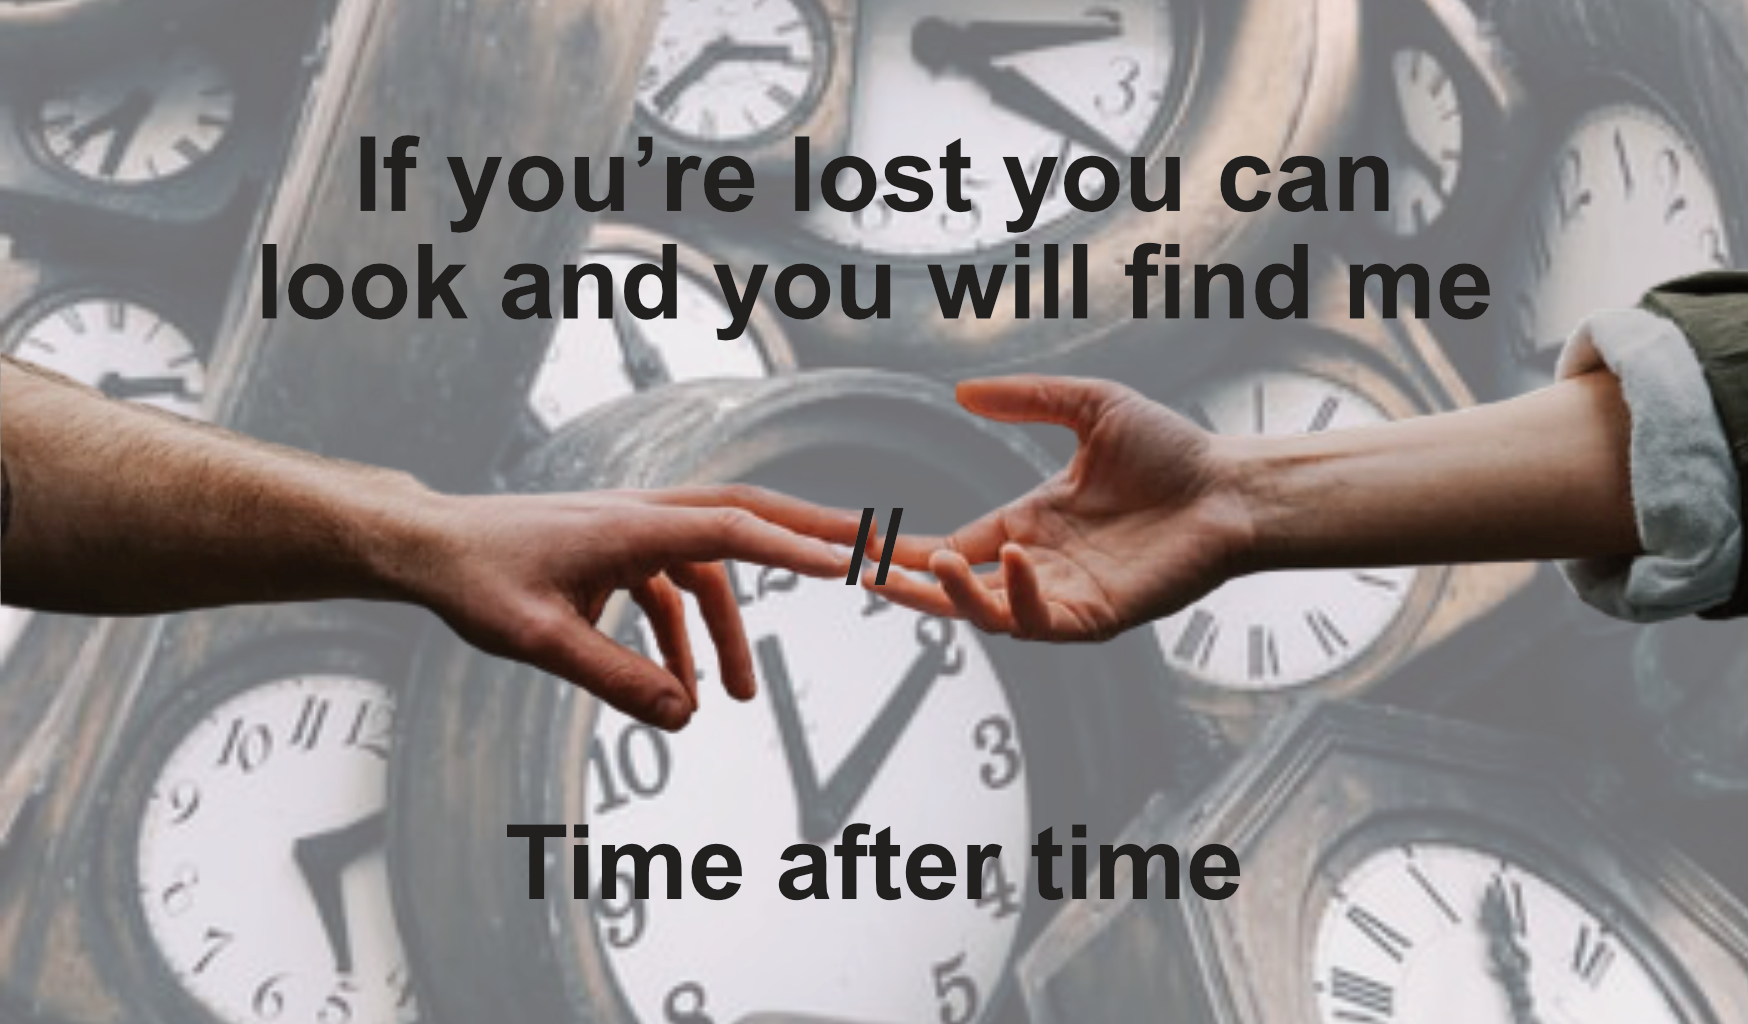 If you're lost you can look and you will find me // Time after time